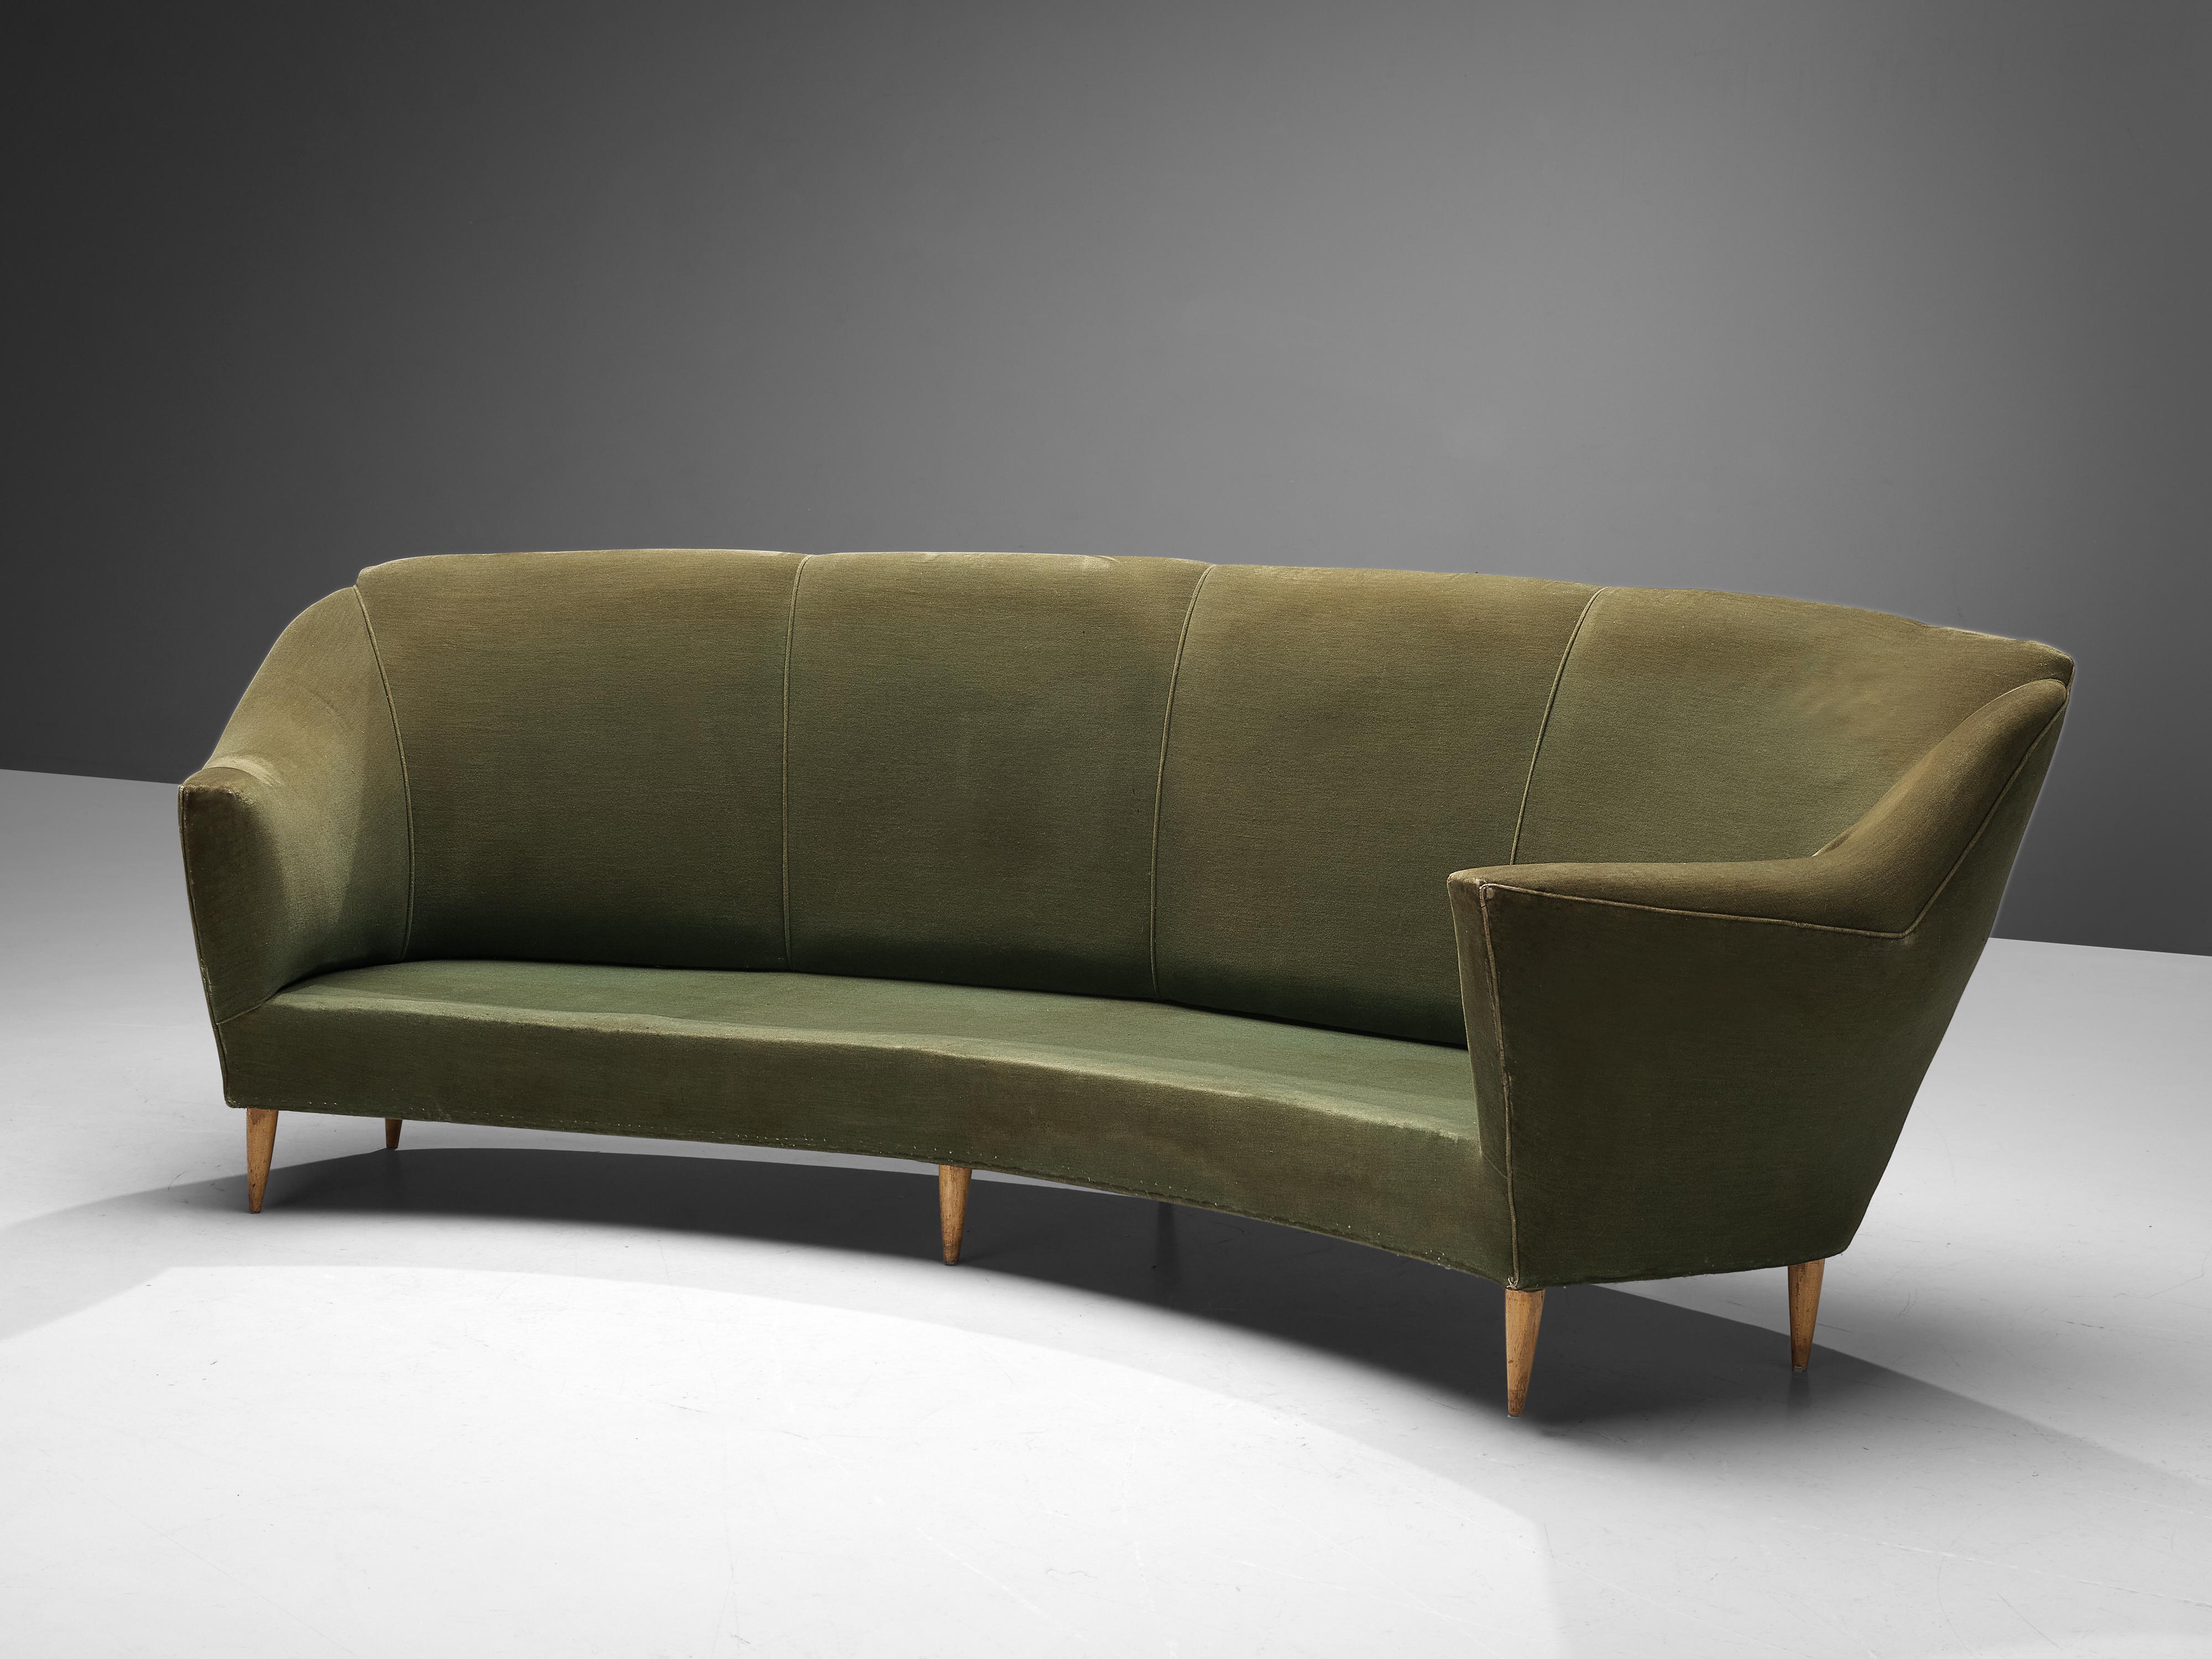 Sofa, fabric and wood, Italy, 1950s. 

Simplistic Italian sofa with clean lines and a high back. The sofa features small tapered wooden legs. The high back embraces the sitter in comforting manner. The armrests are slightly raised upwards towards